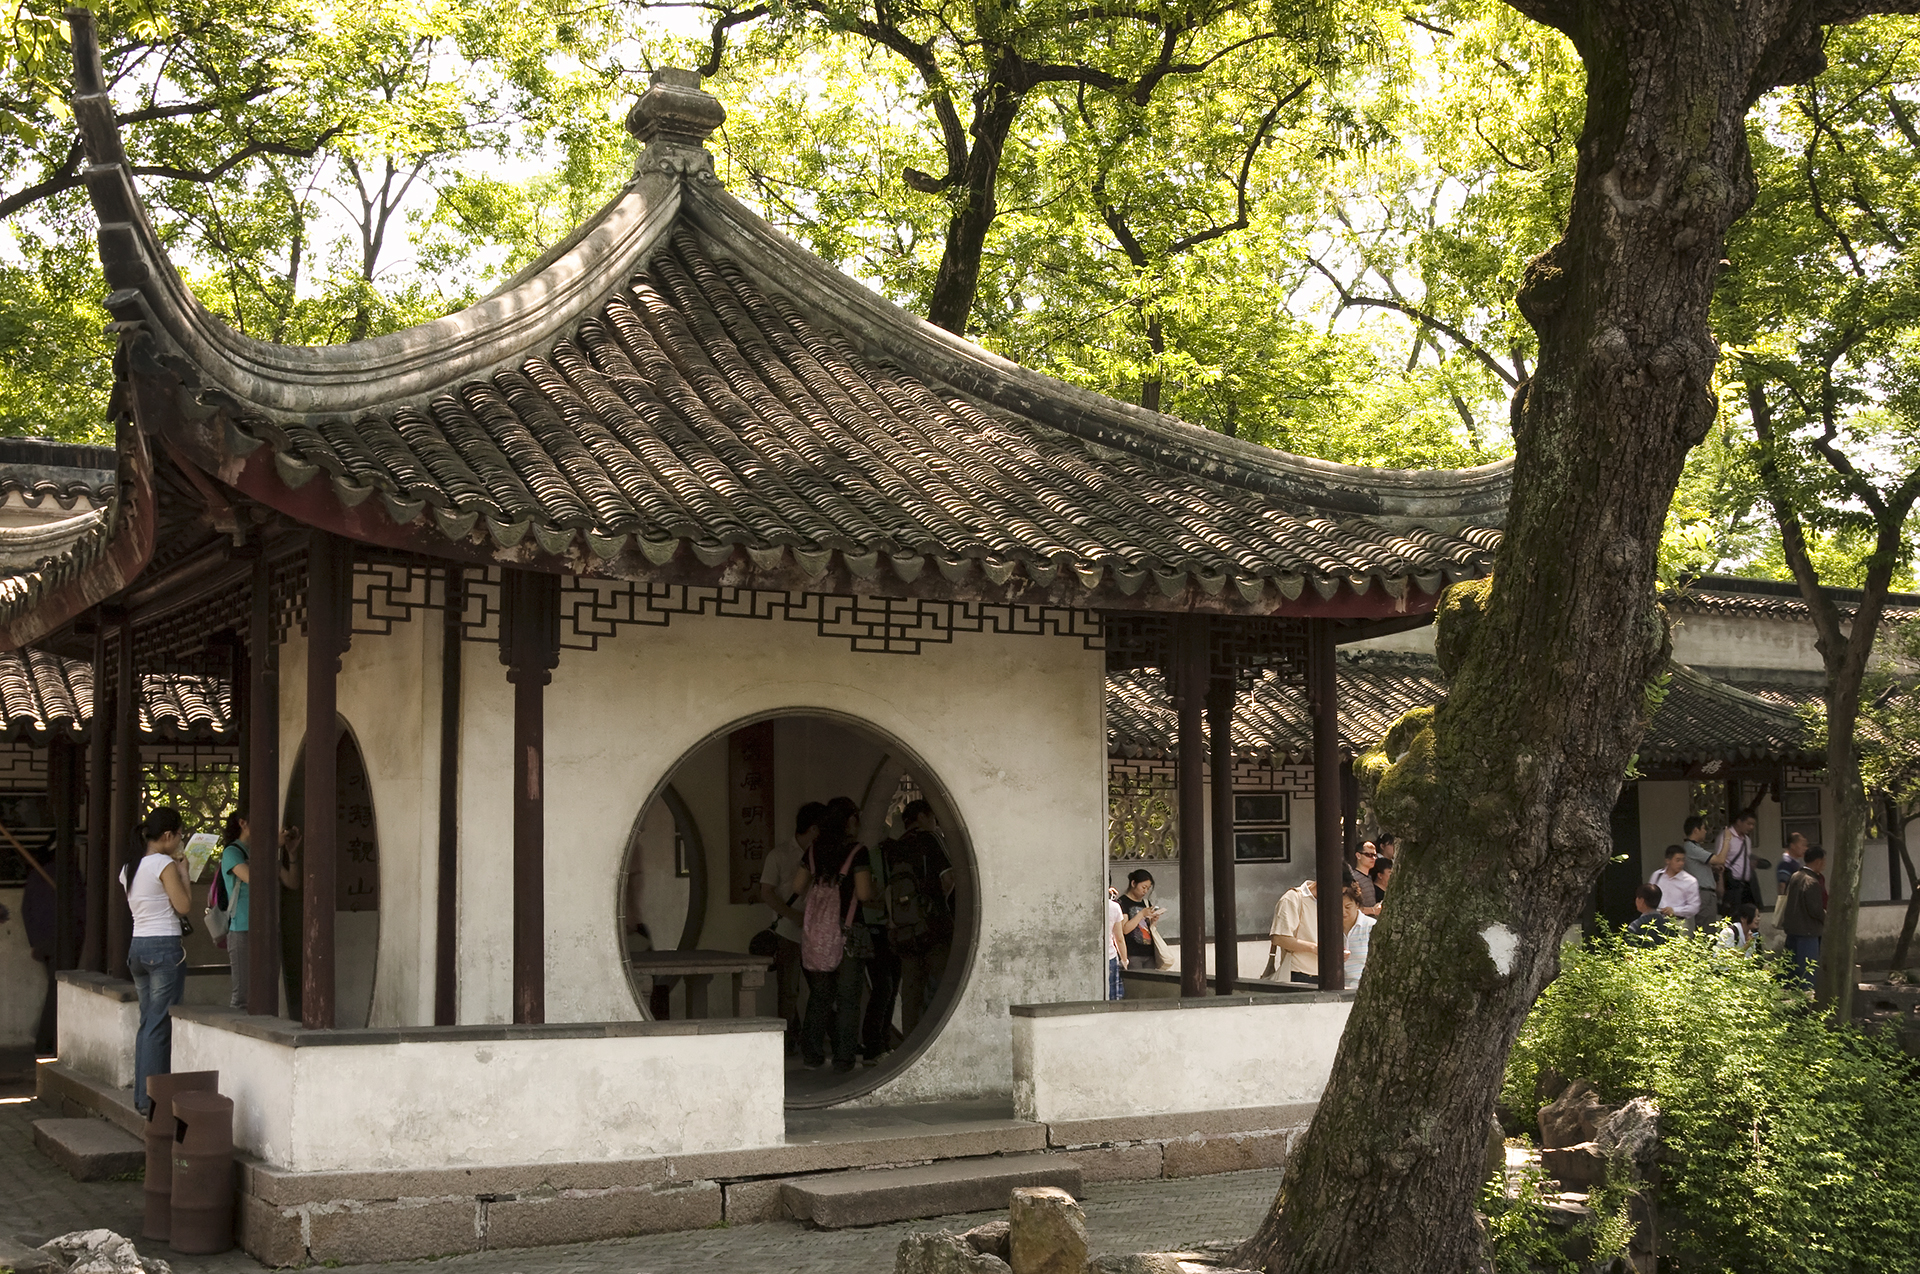 Garden of the Unsuccessful Politician (Pavilion with Moon Doors), ca. 1500-1535 (Suzhou, China). Photo by Jonathan, CC BY-NC-ND 2.0.